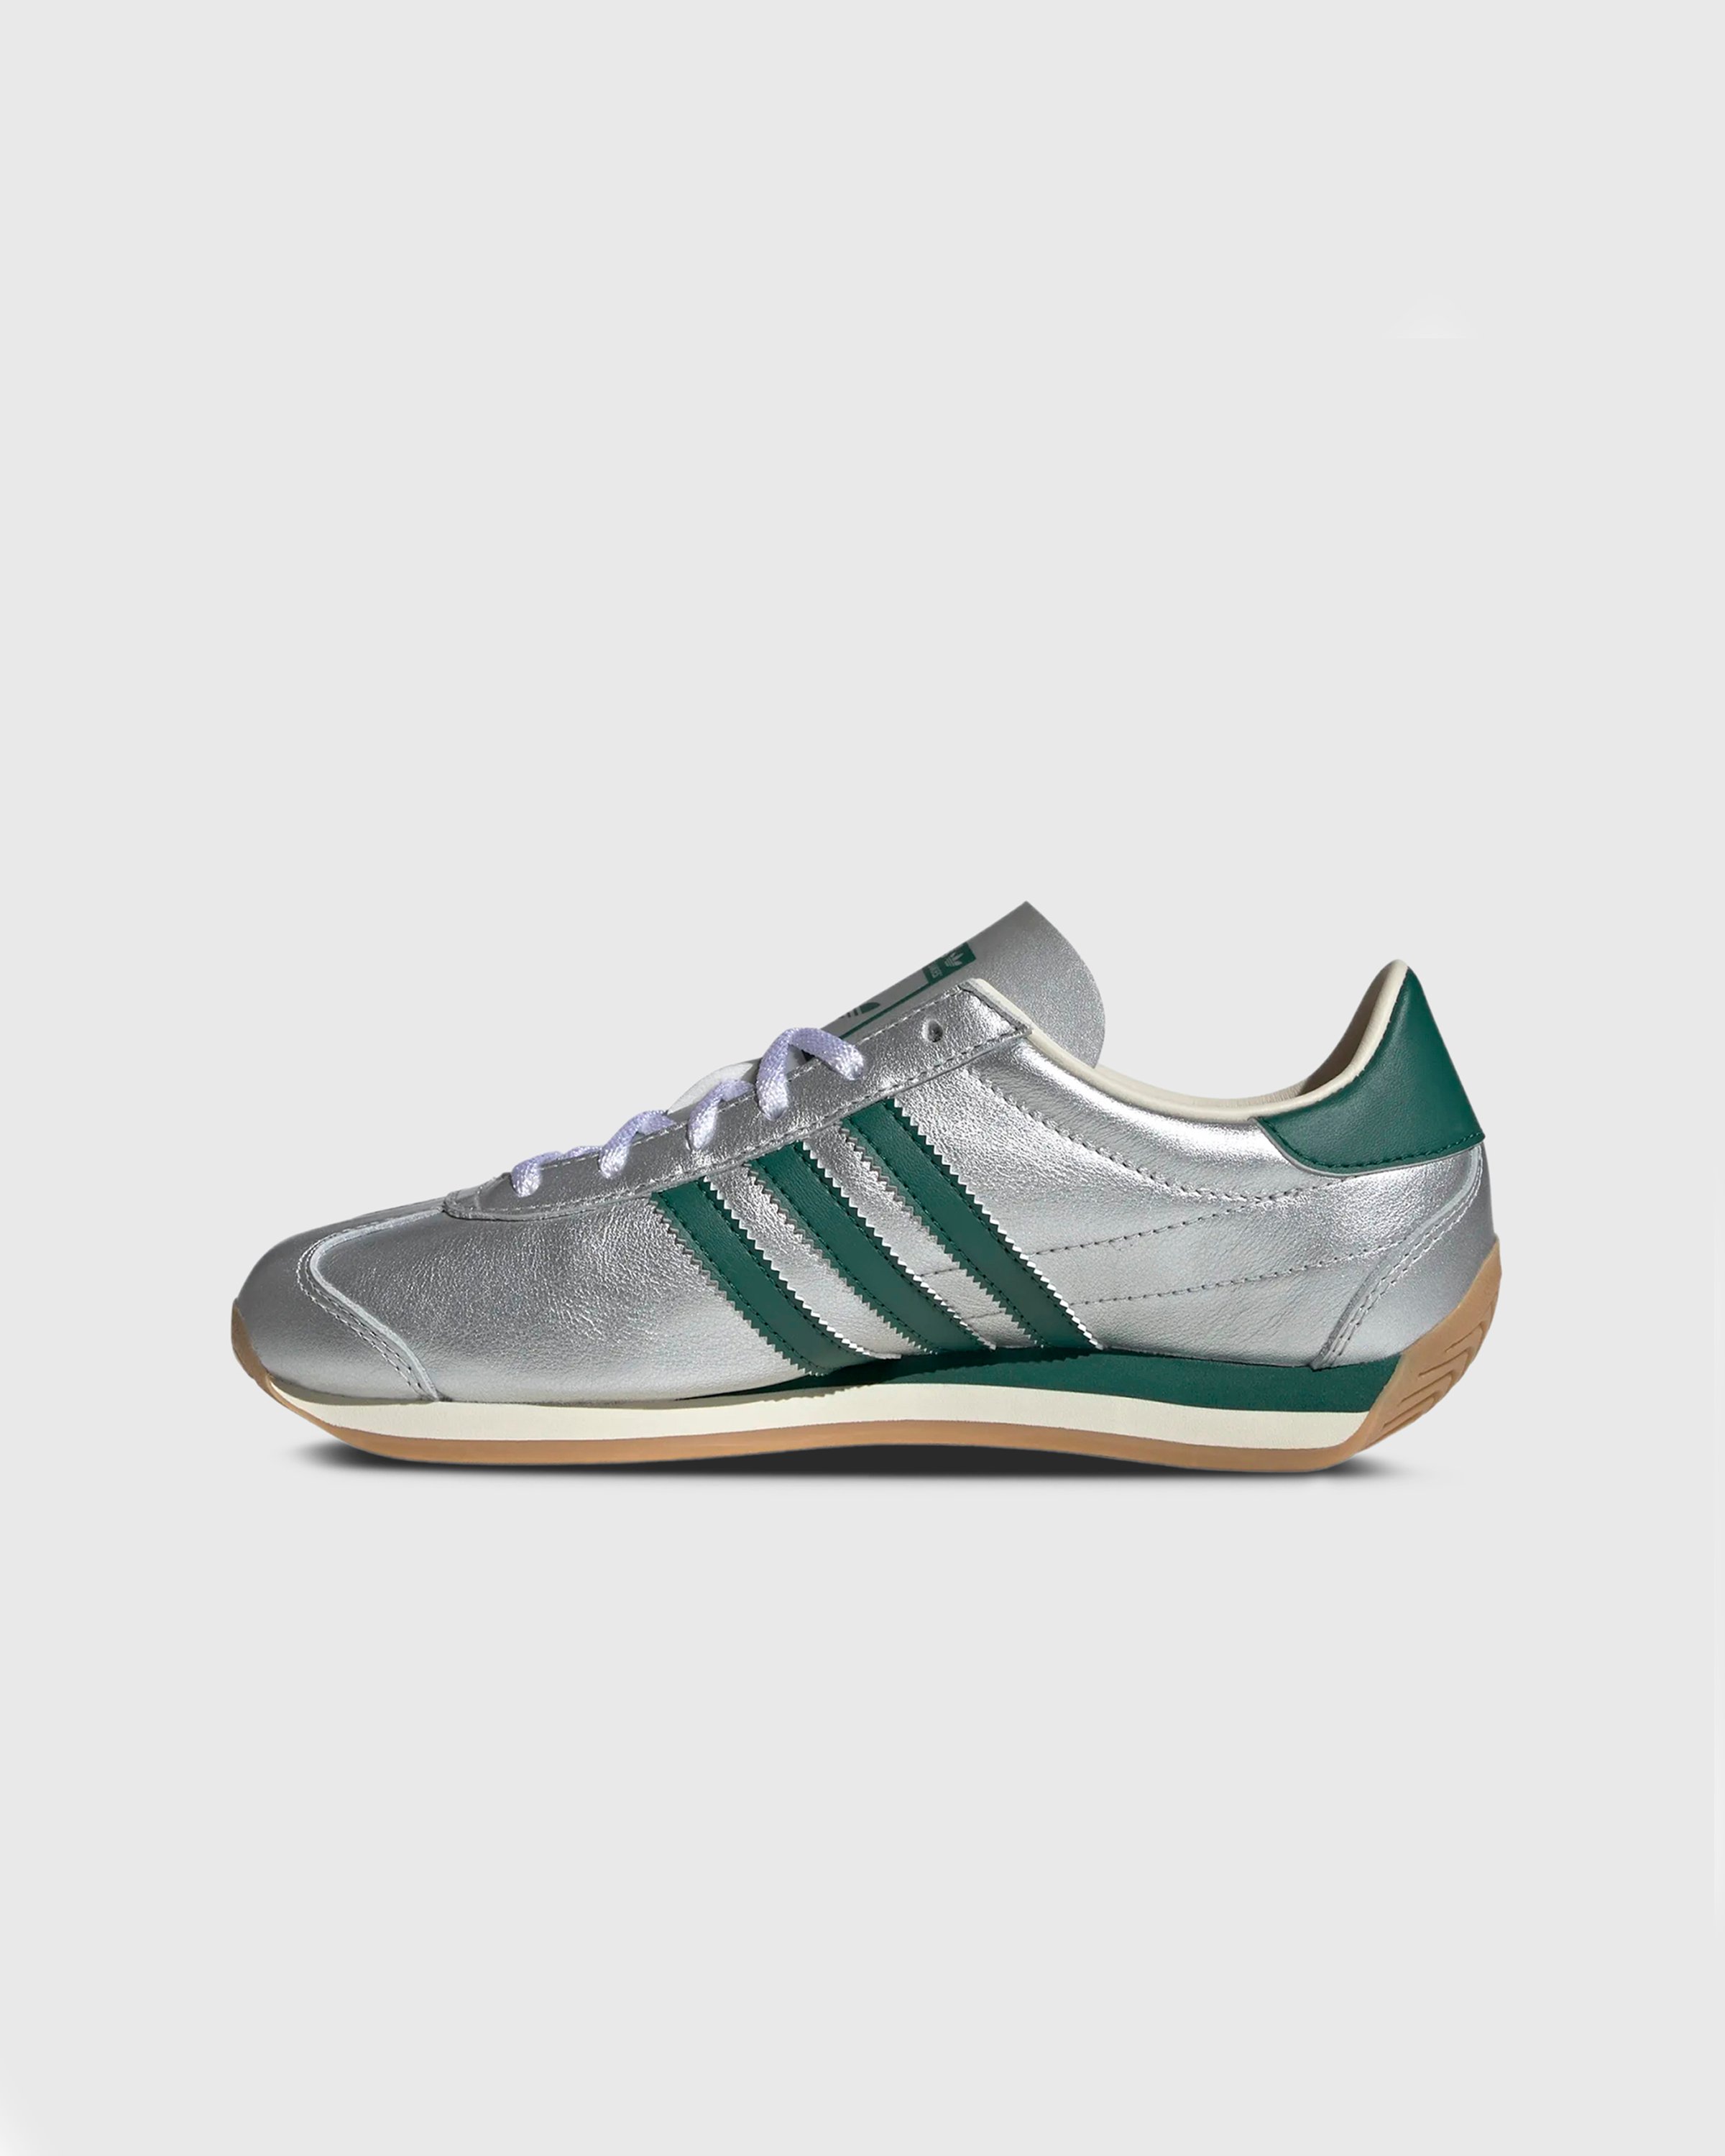 Adidas - COUNTRY OG W        SILVMT/CGREEN/CWHITE - Footwear - Silver - Image 2